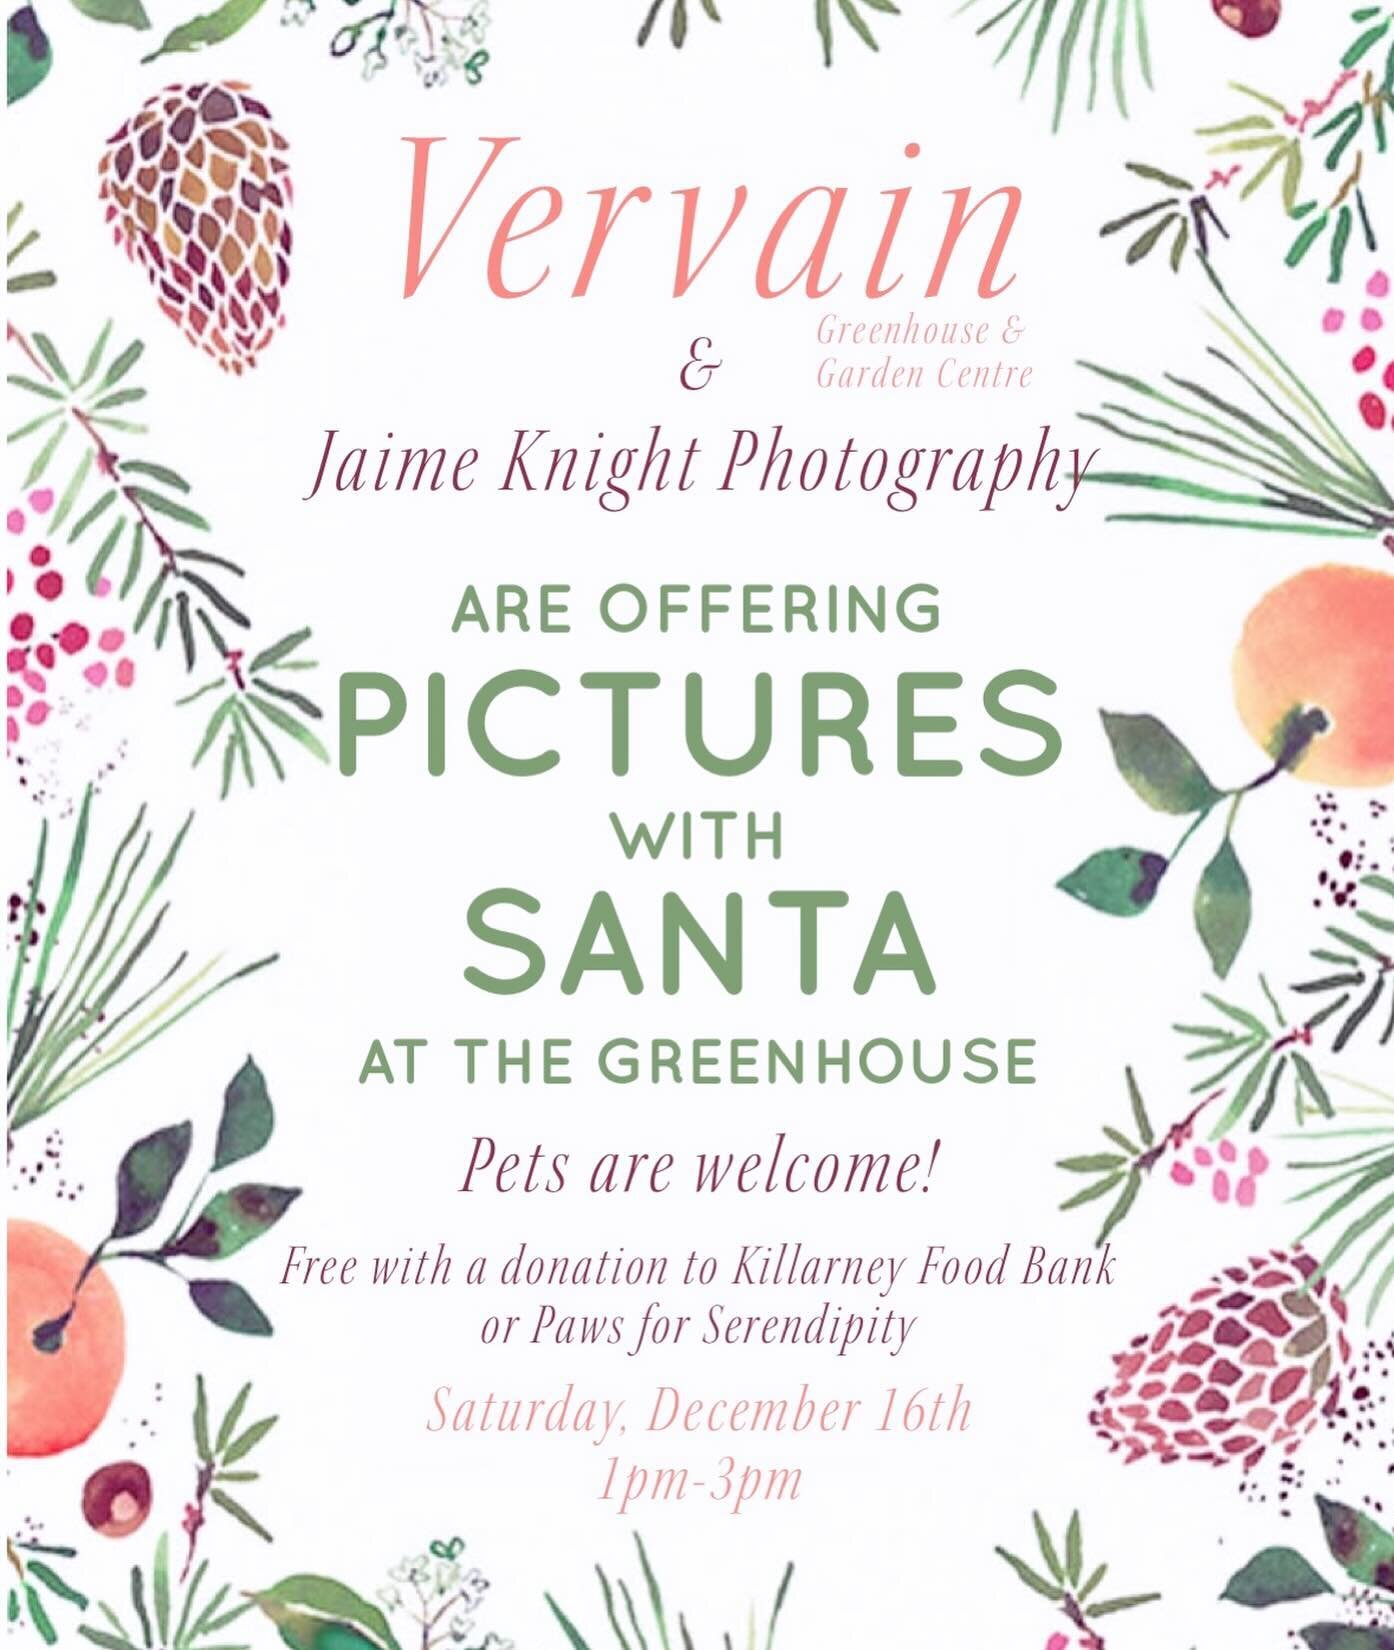 Our last weekend open for the season! 

Santa Pictures with @jaimeknightphotography this Saturday at the greenhouse! 
1-3pm